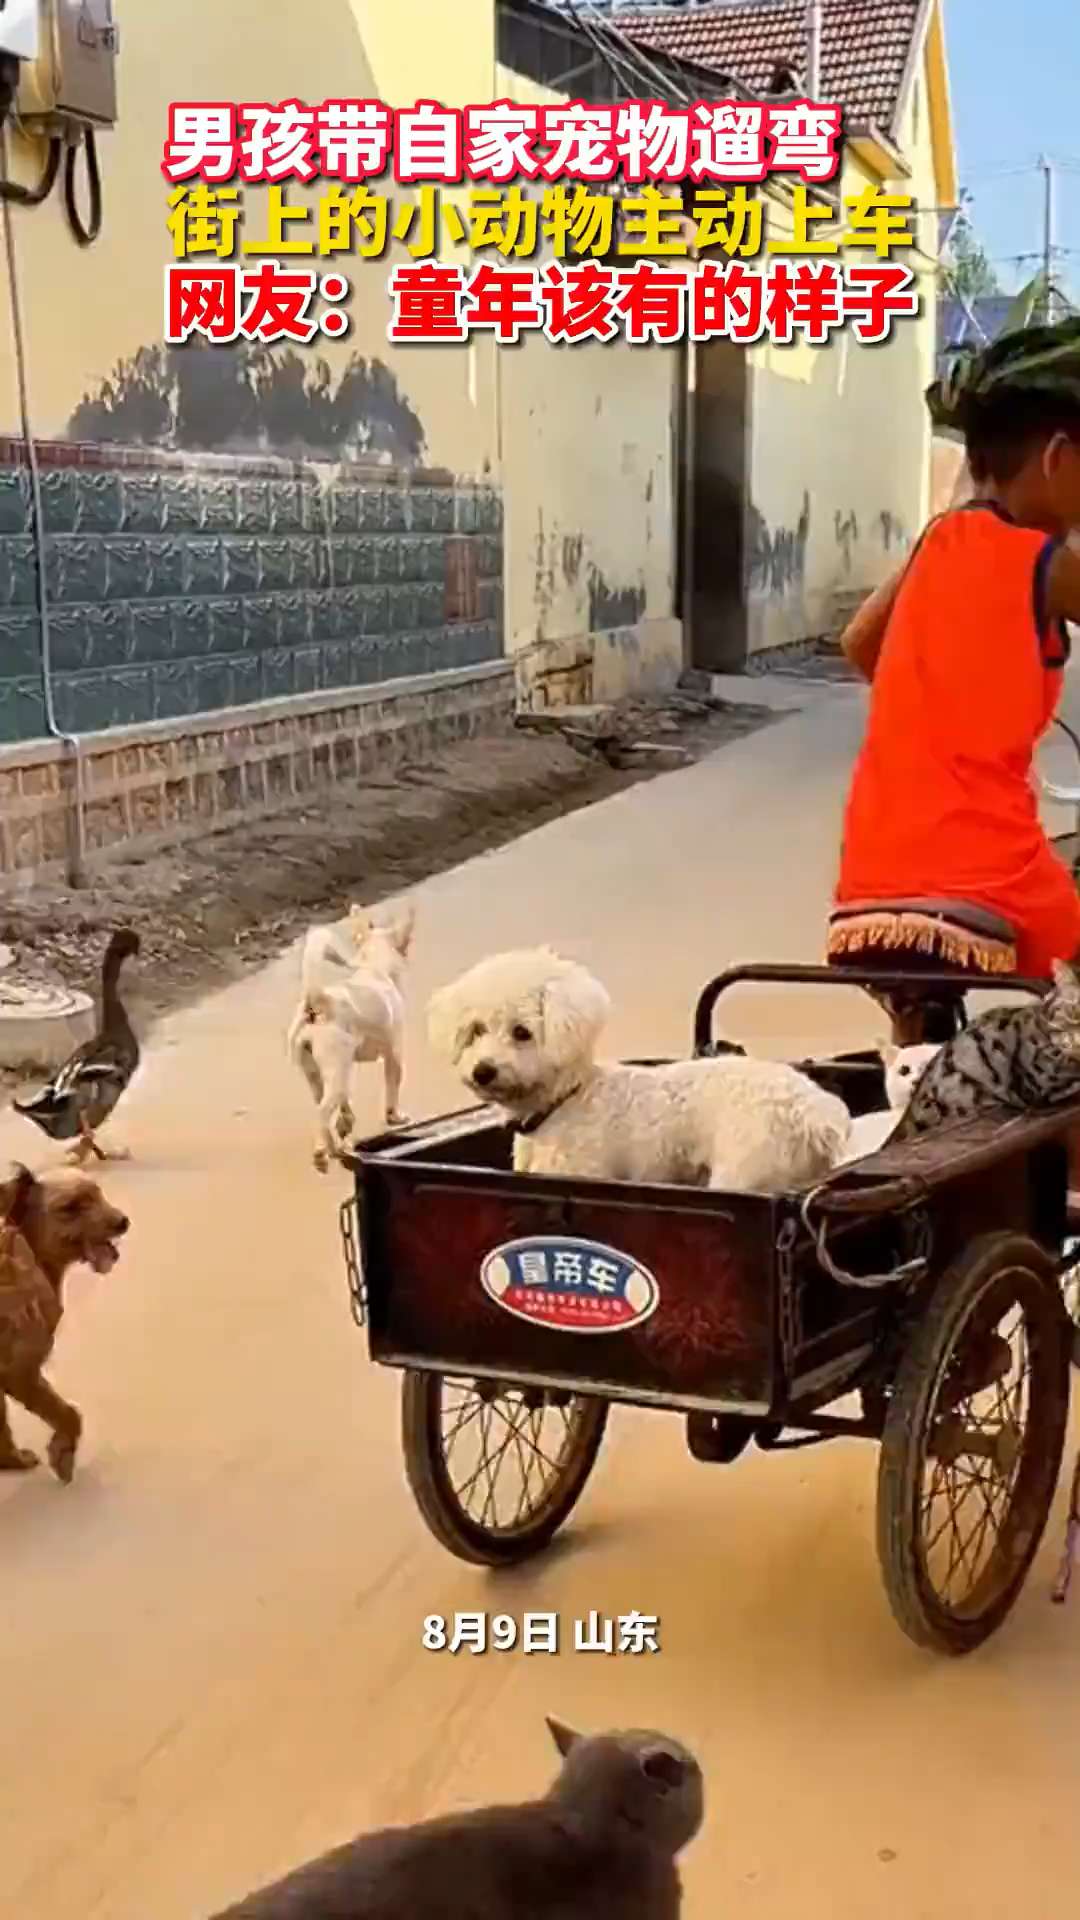 The boy riding a bike for a walk with pets